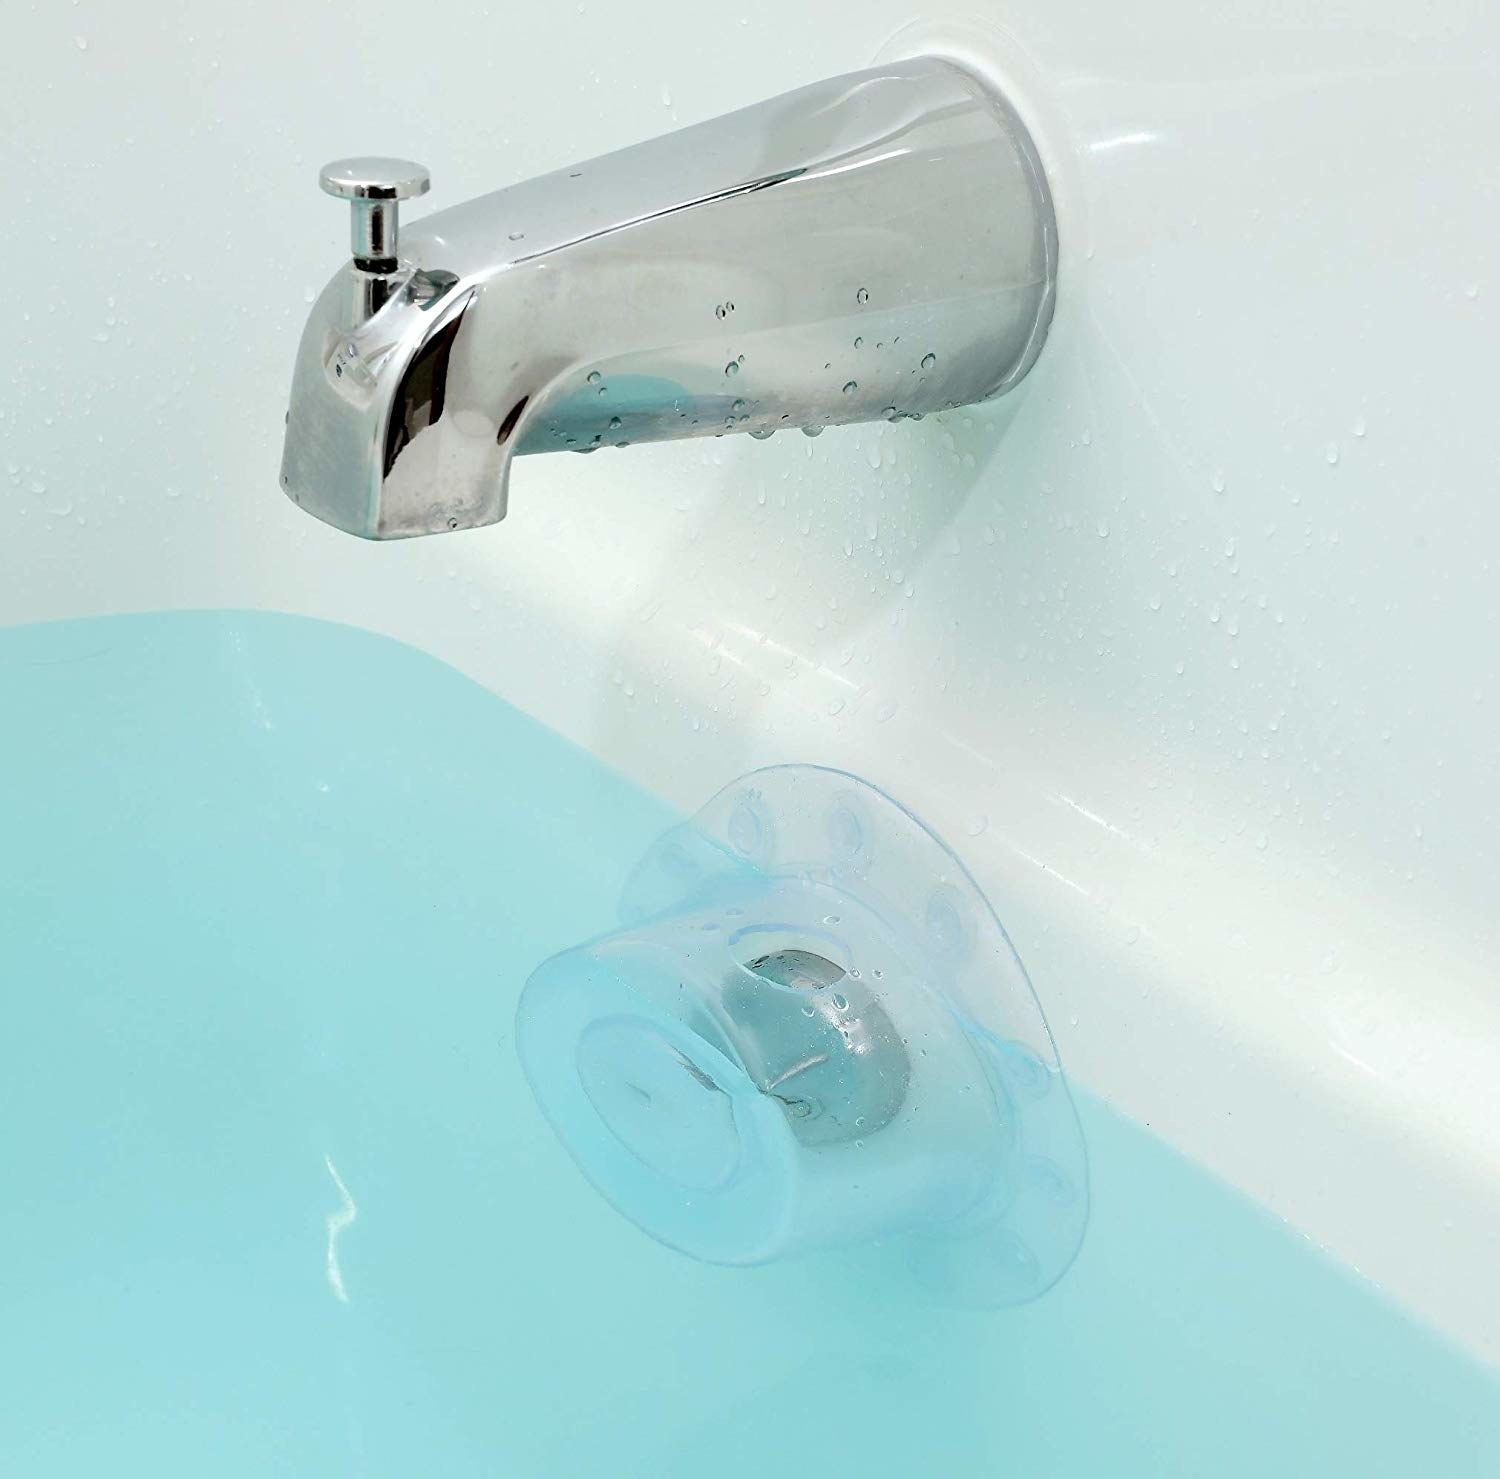 a clear plastic suction cup over a tub drain